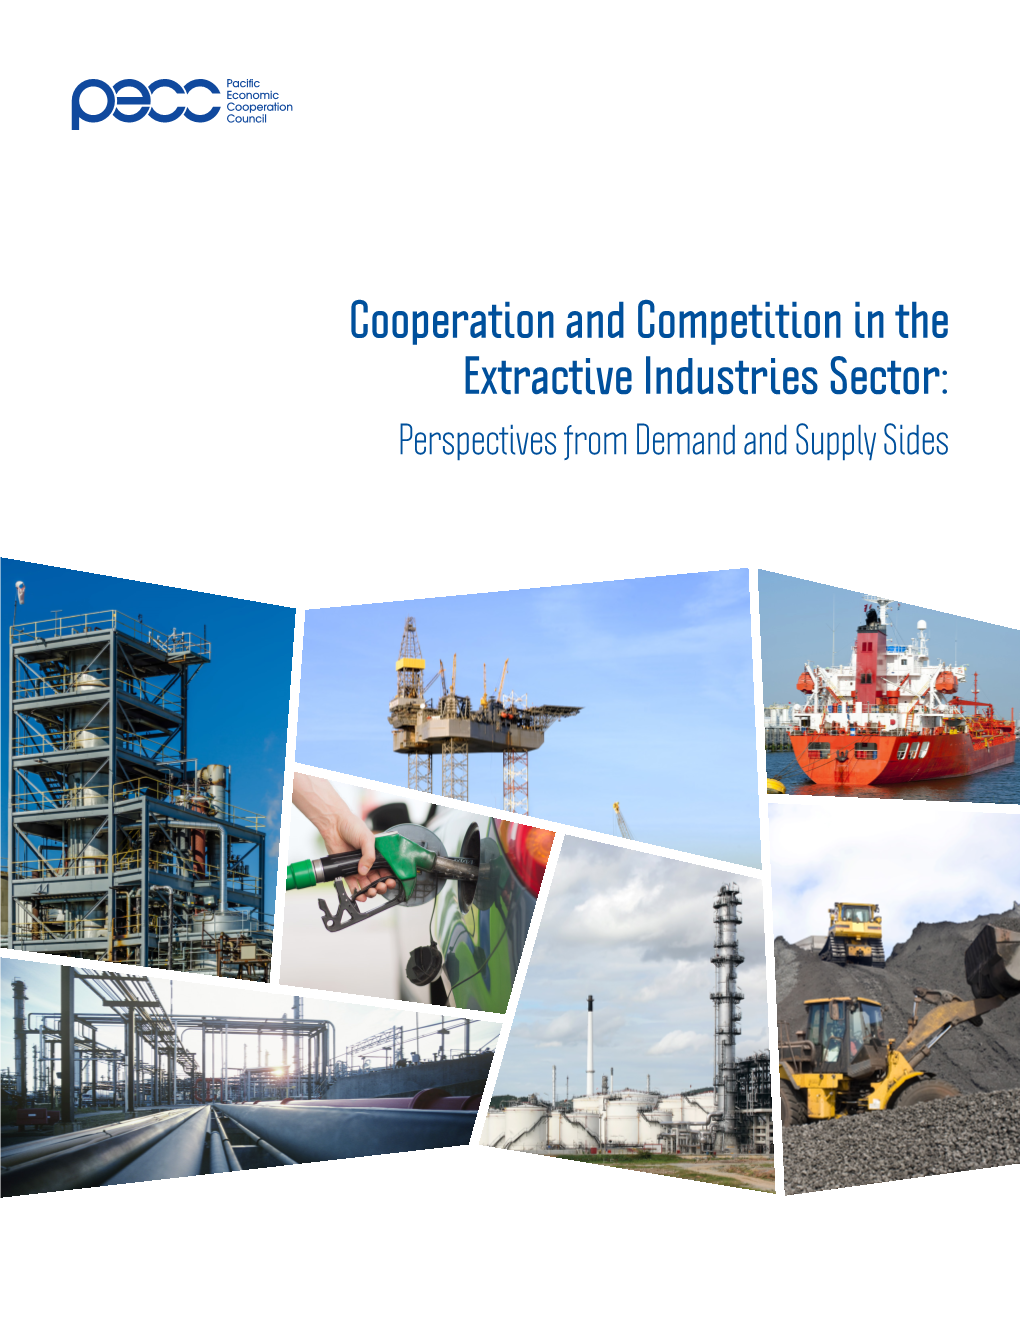 Cooperation and Competition in the Extractive Industries Sector: Perspectives from Demand and Supply Sides Executive Summary